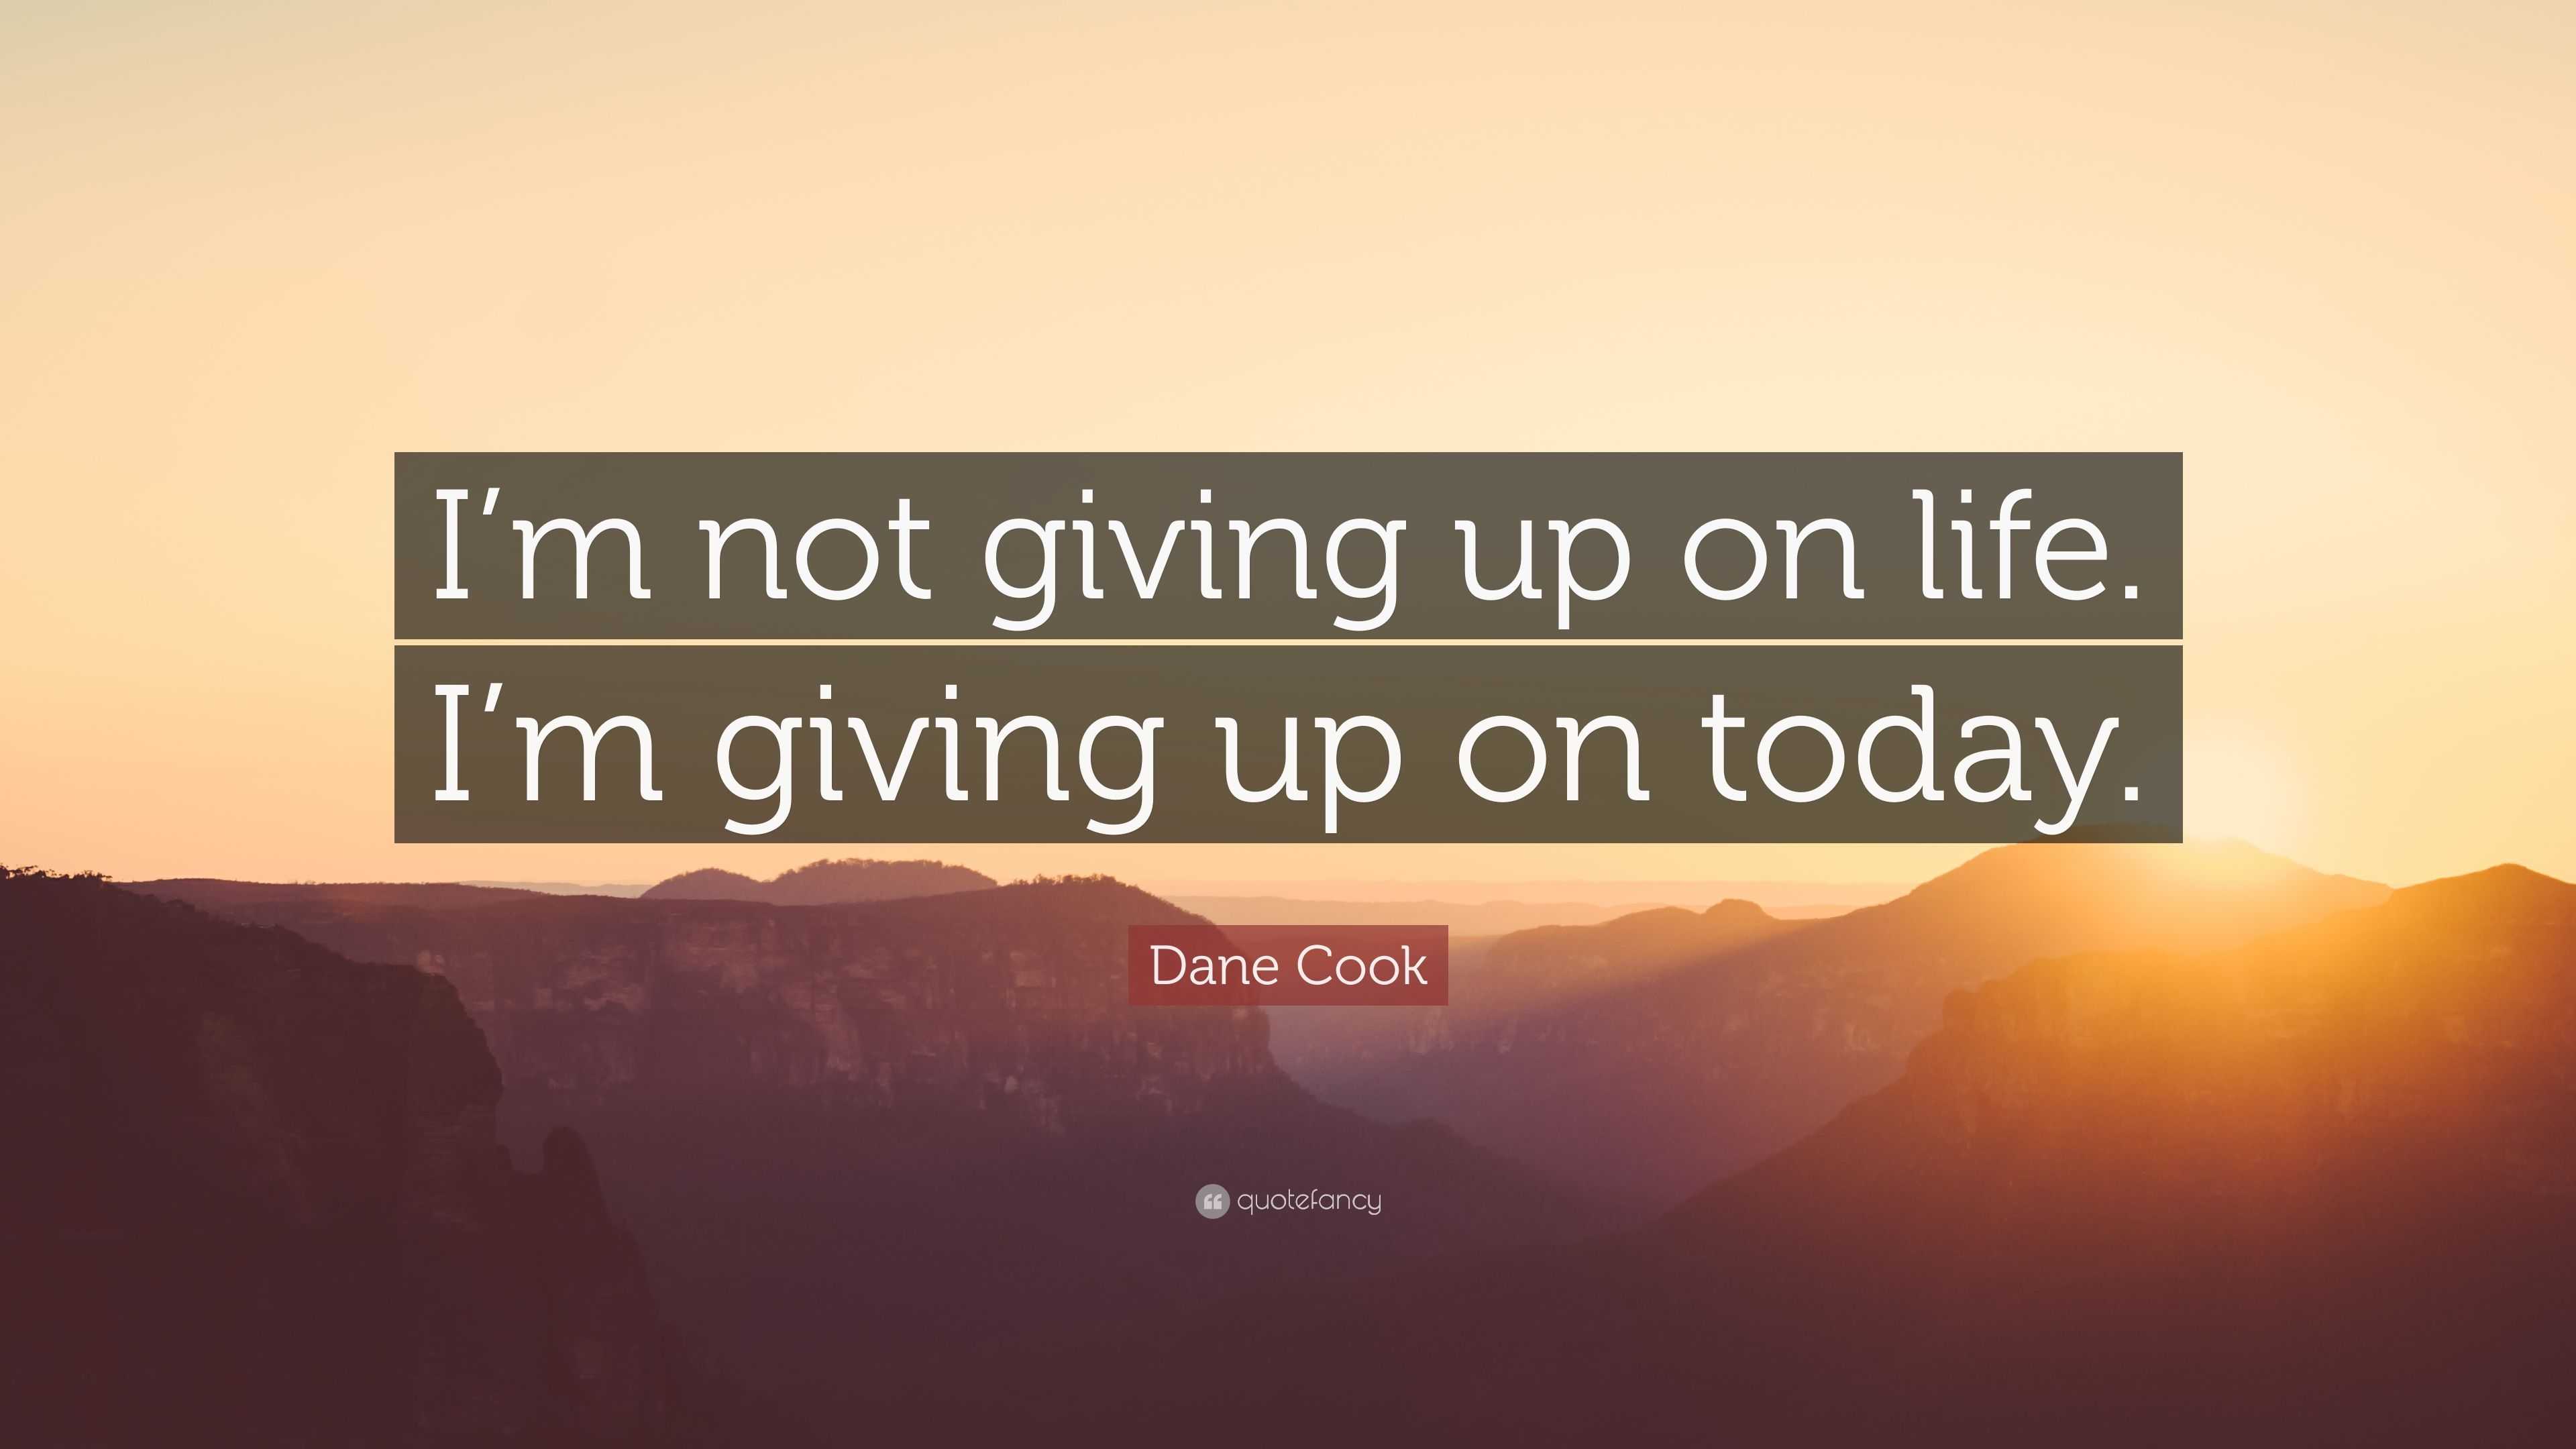 Dane Cook Quote: “I’m not giving up on life. I’m giving up on today.”